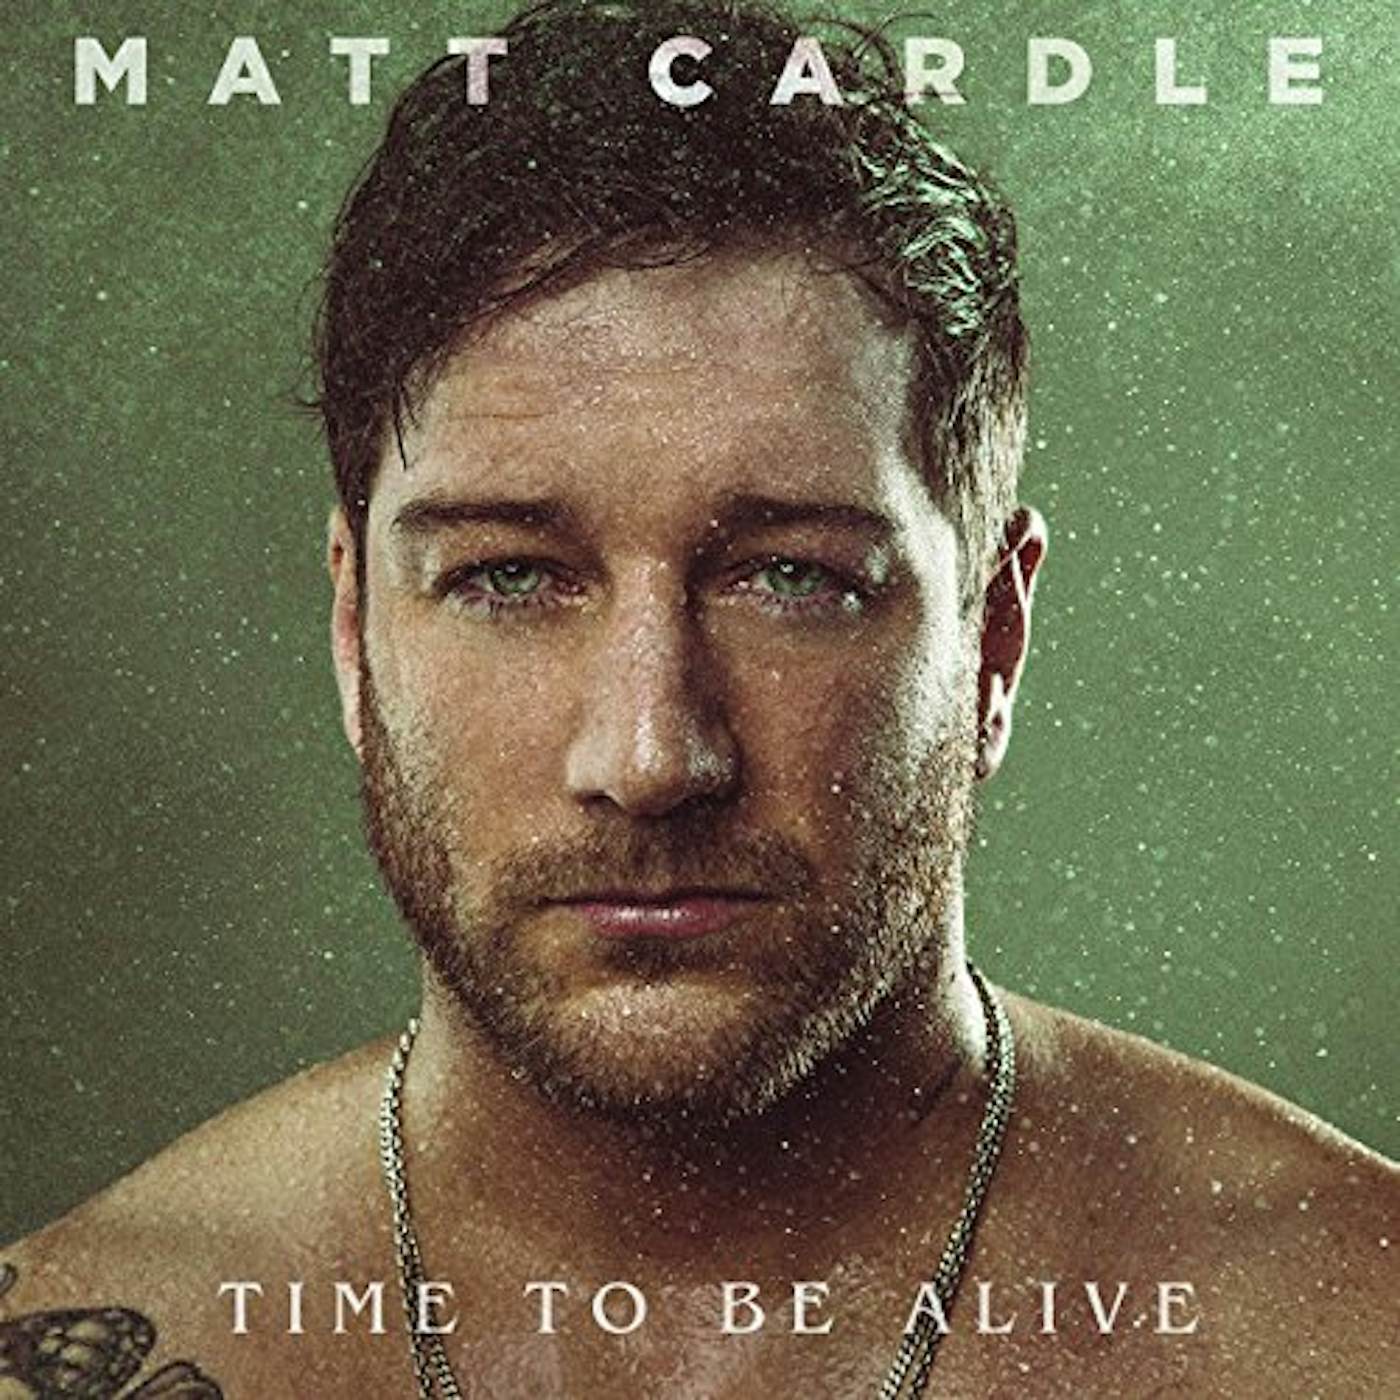 Matt Cardle TIME TO BE ALIVE CD